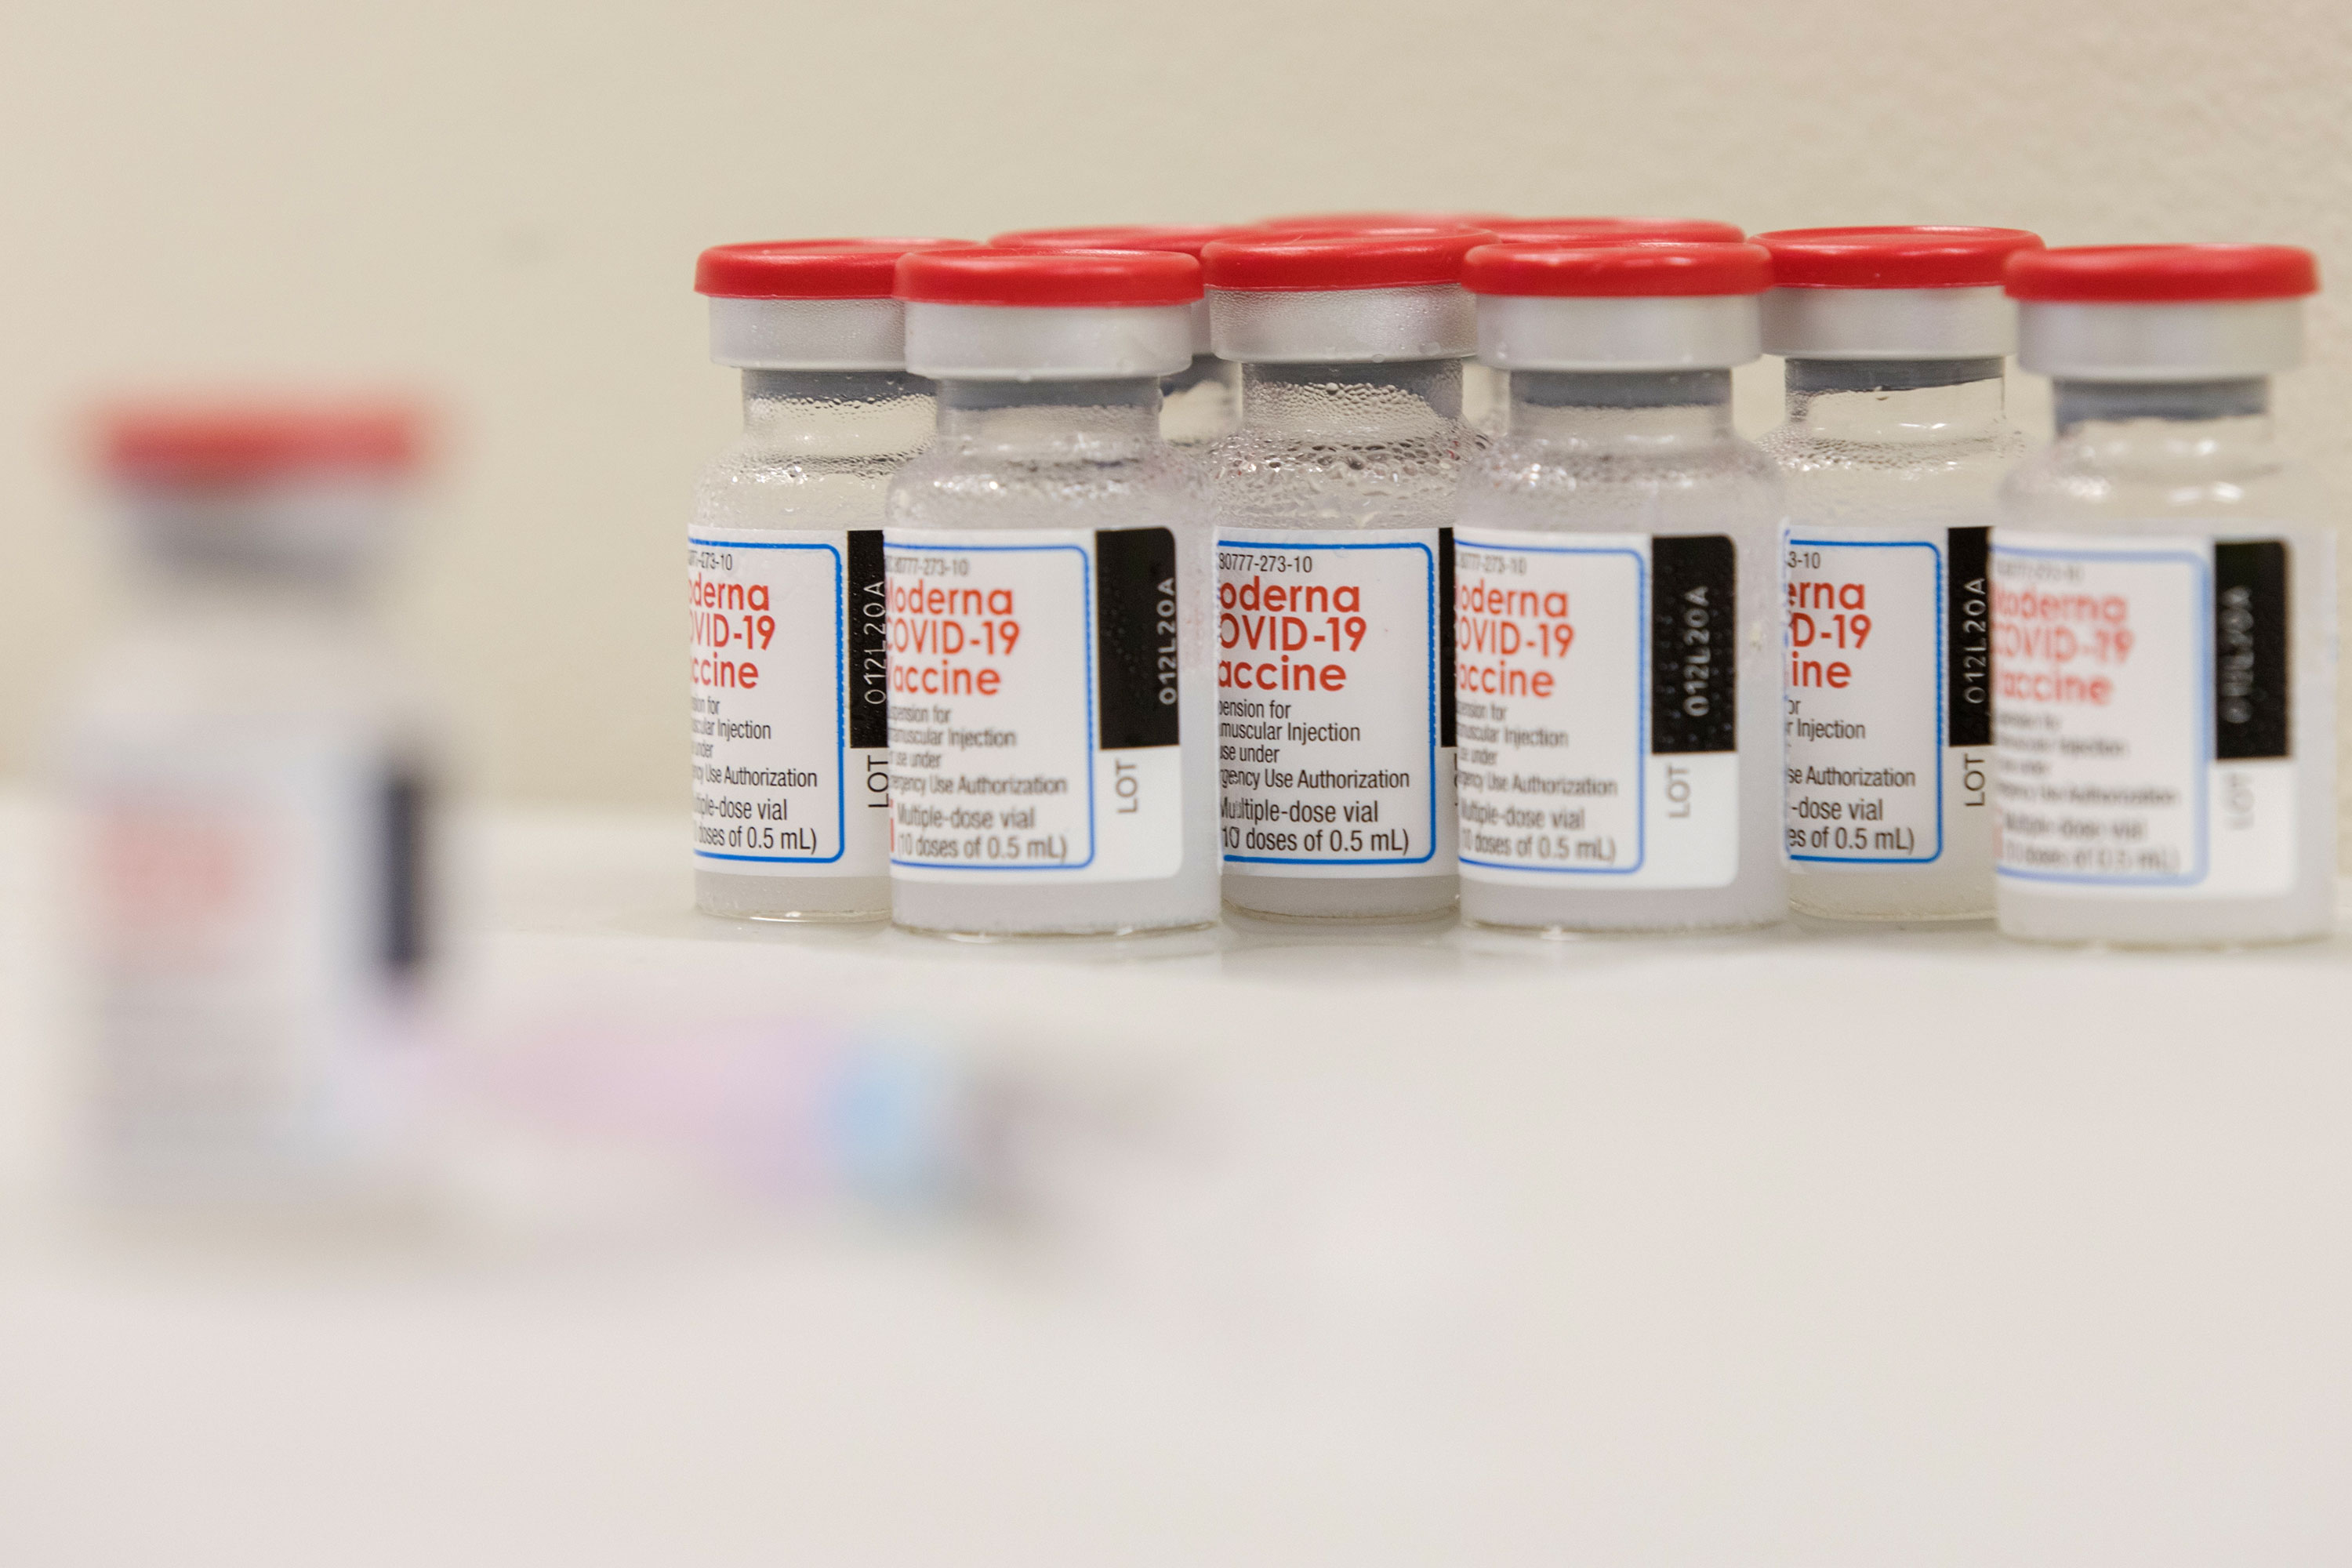 Vials of the Moderna Covid-19 vaccine are seen at an assisted living facility in Sumter, South Carolina, on January 26.